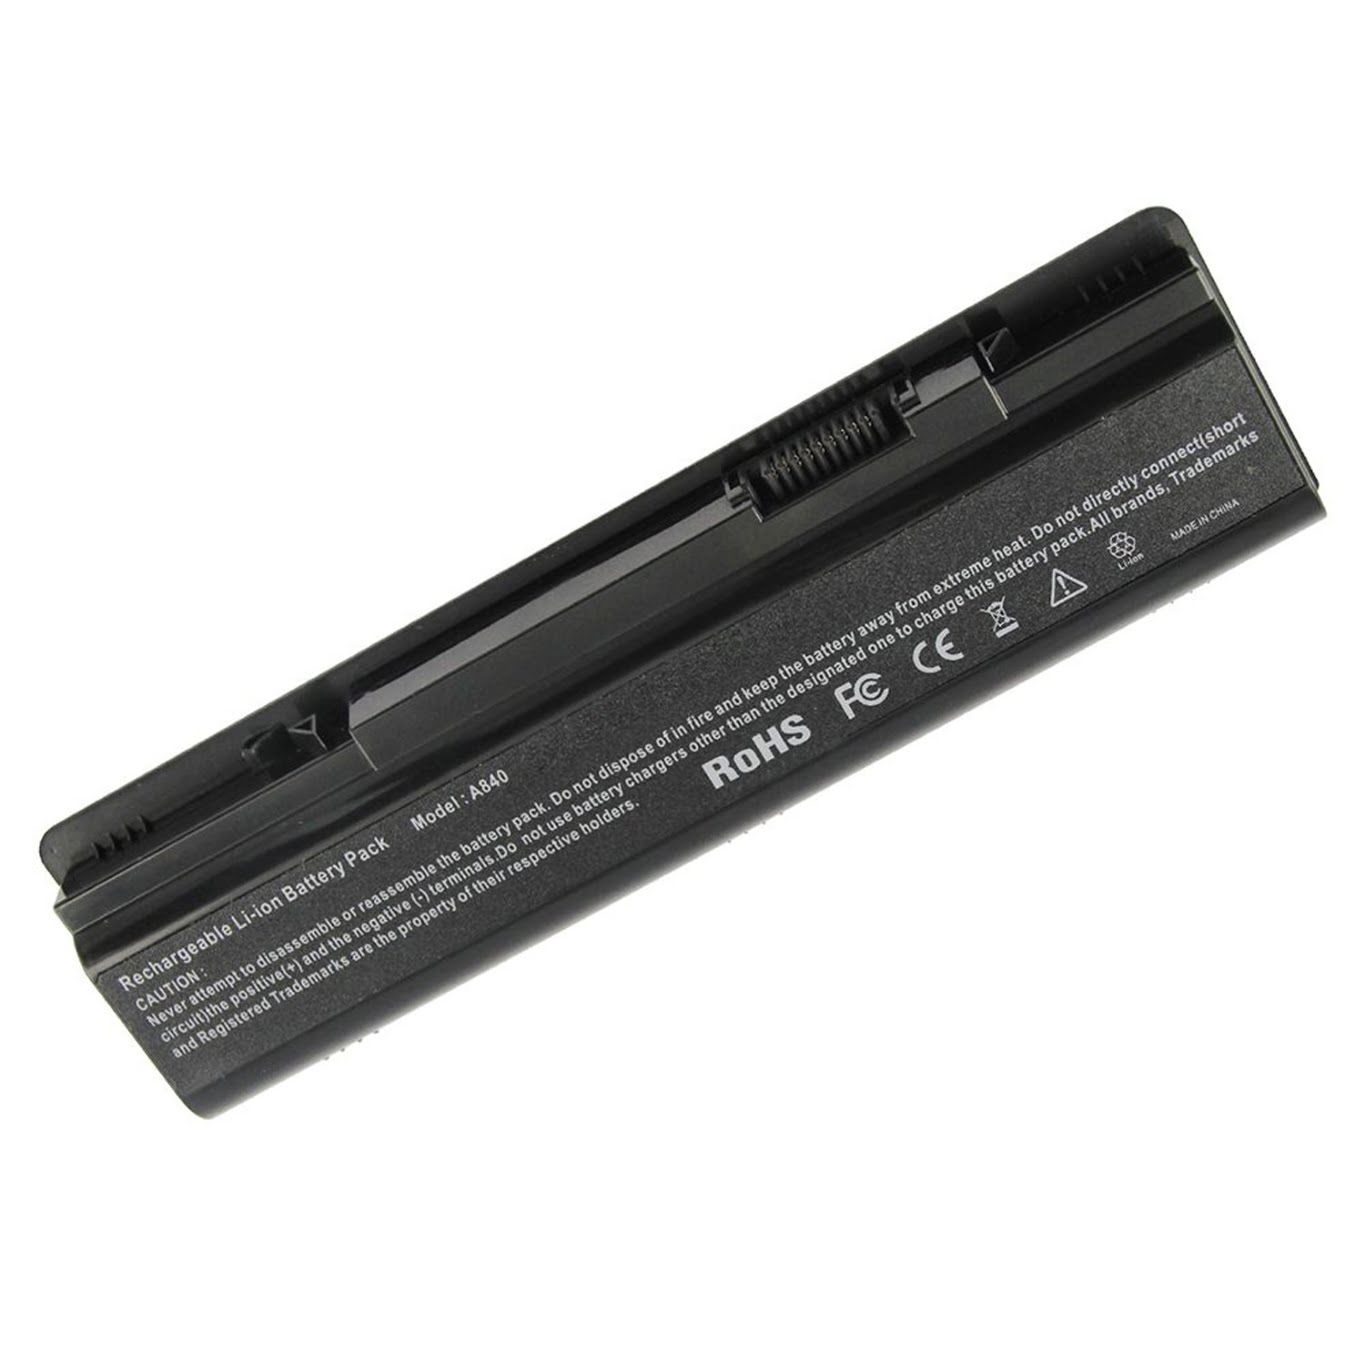 Dell 0f287h, 0r988h Laptop Battery For Inspiron 1410, V1014 replacement